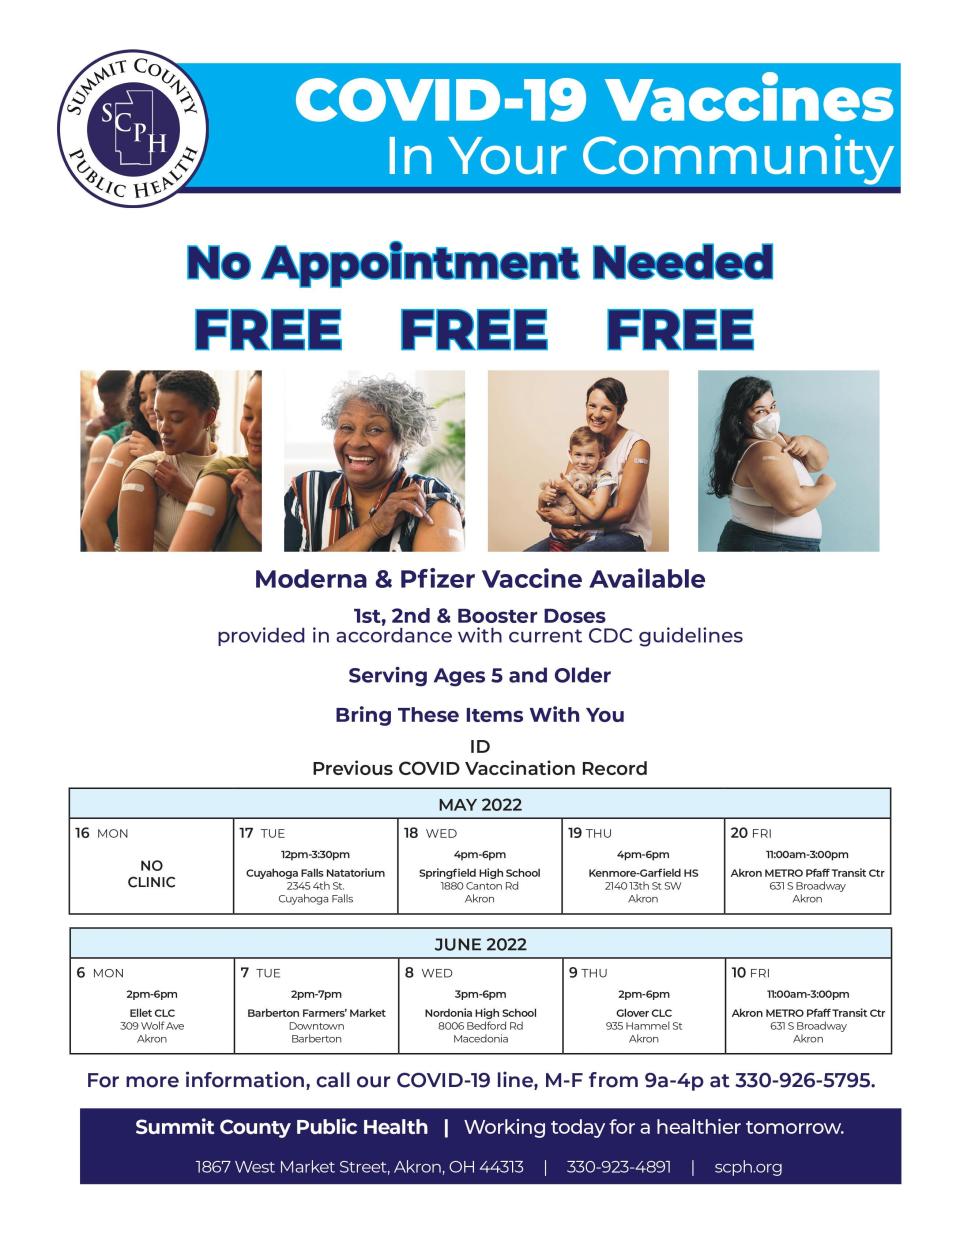 The Summit County Public Health Department will be taking COVID-19 vaccination clinics out to the community in May and June.